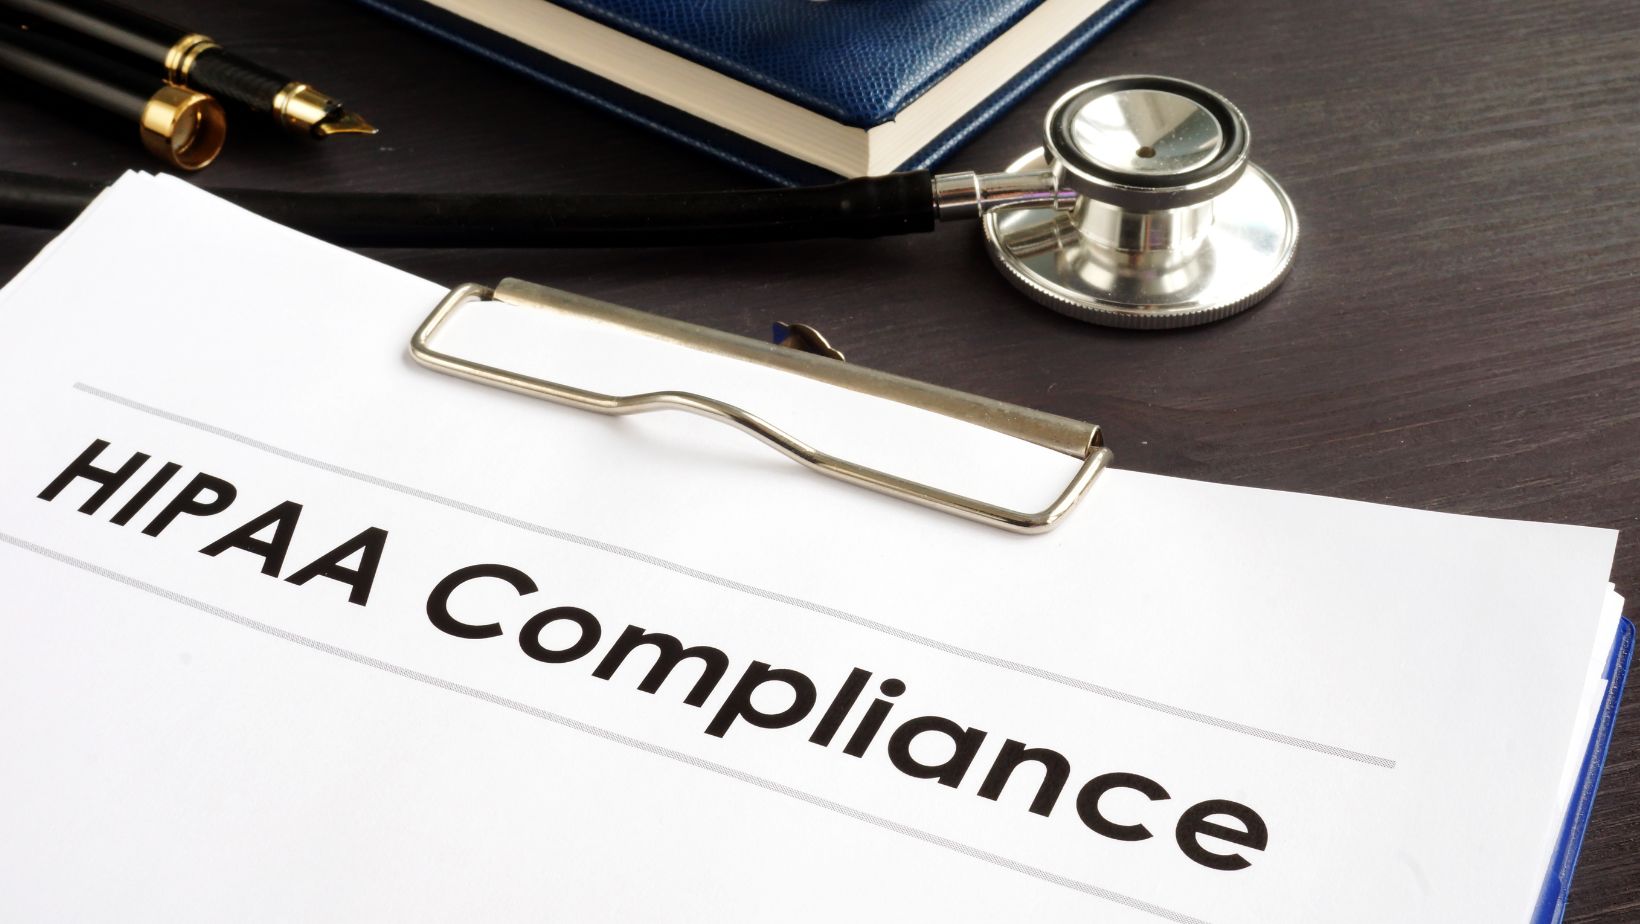 when required, the information provided to the data subject in a hipaa disclosure accounting